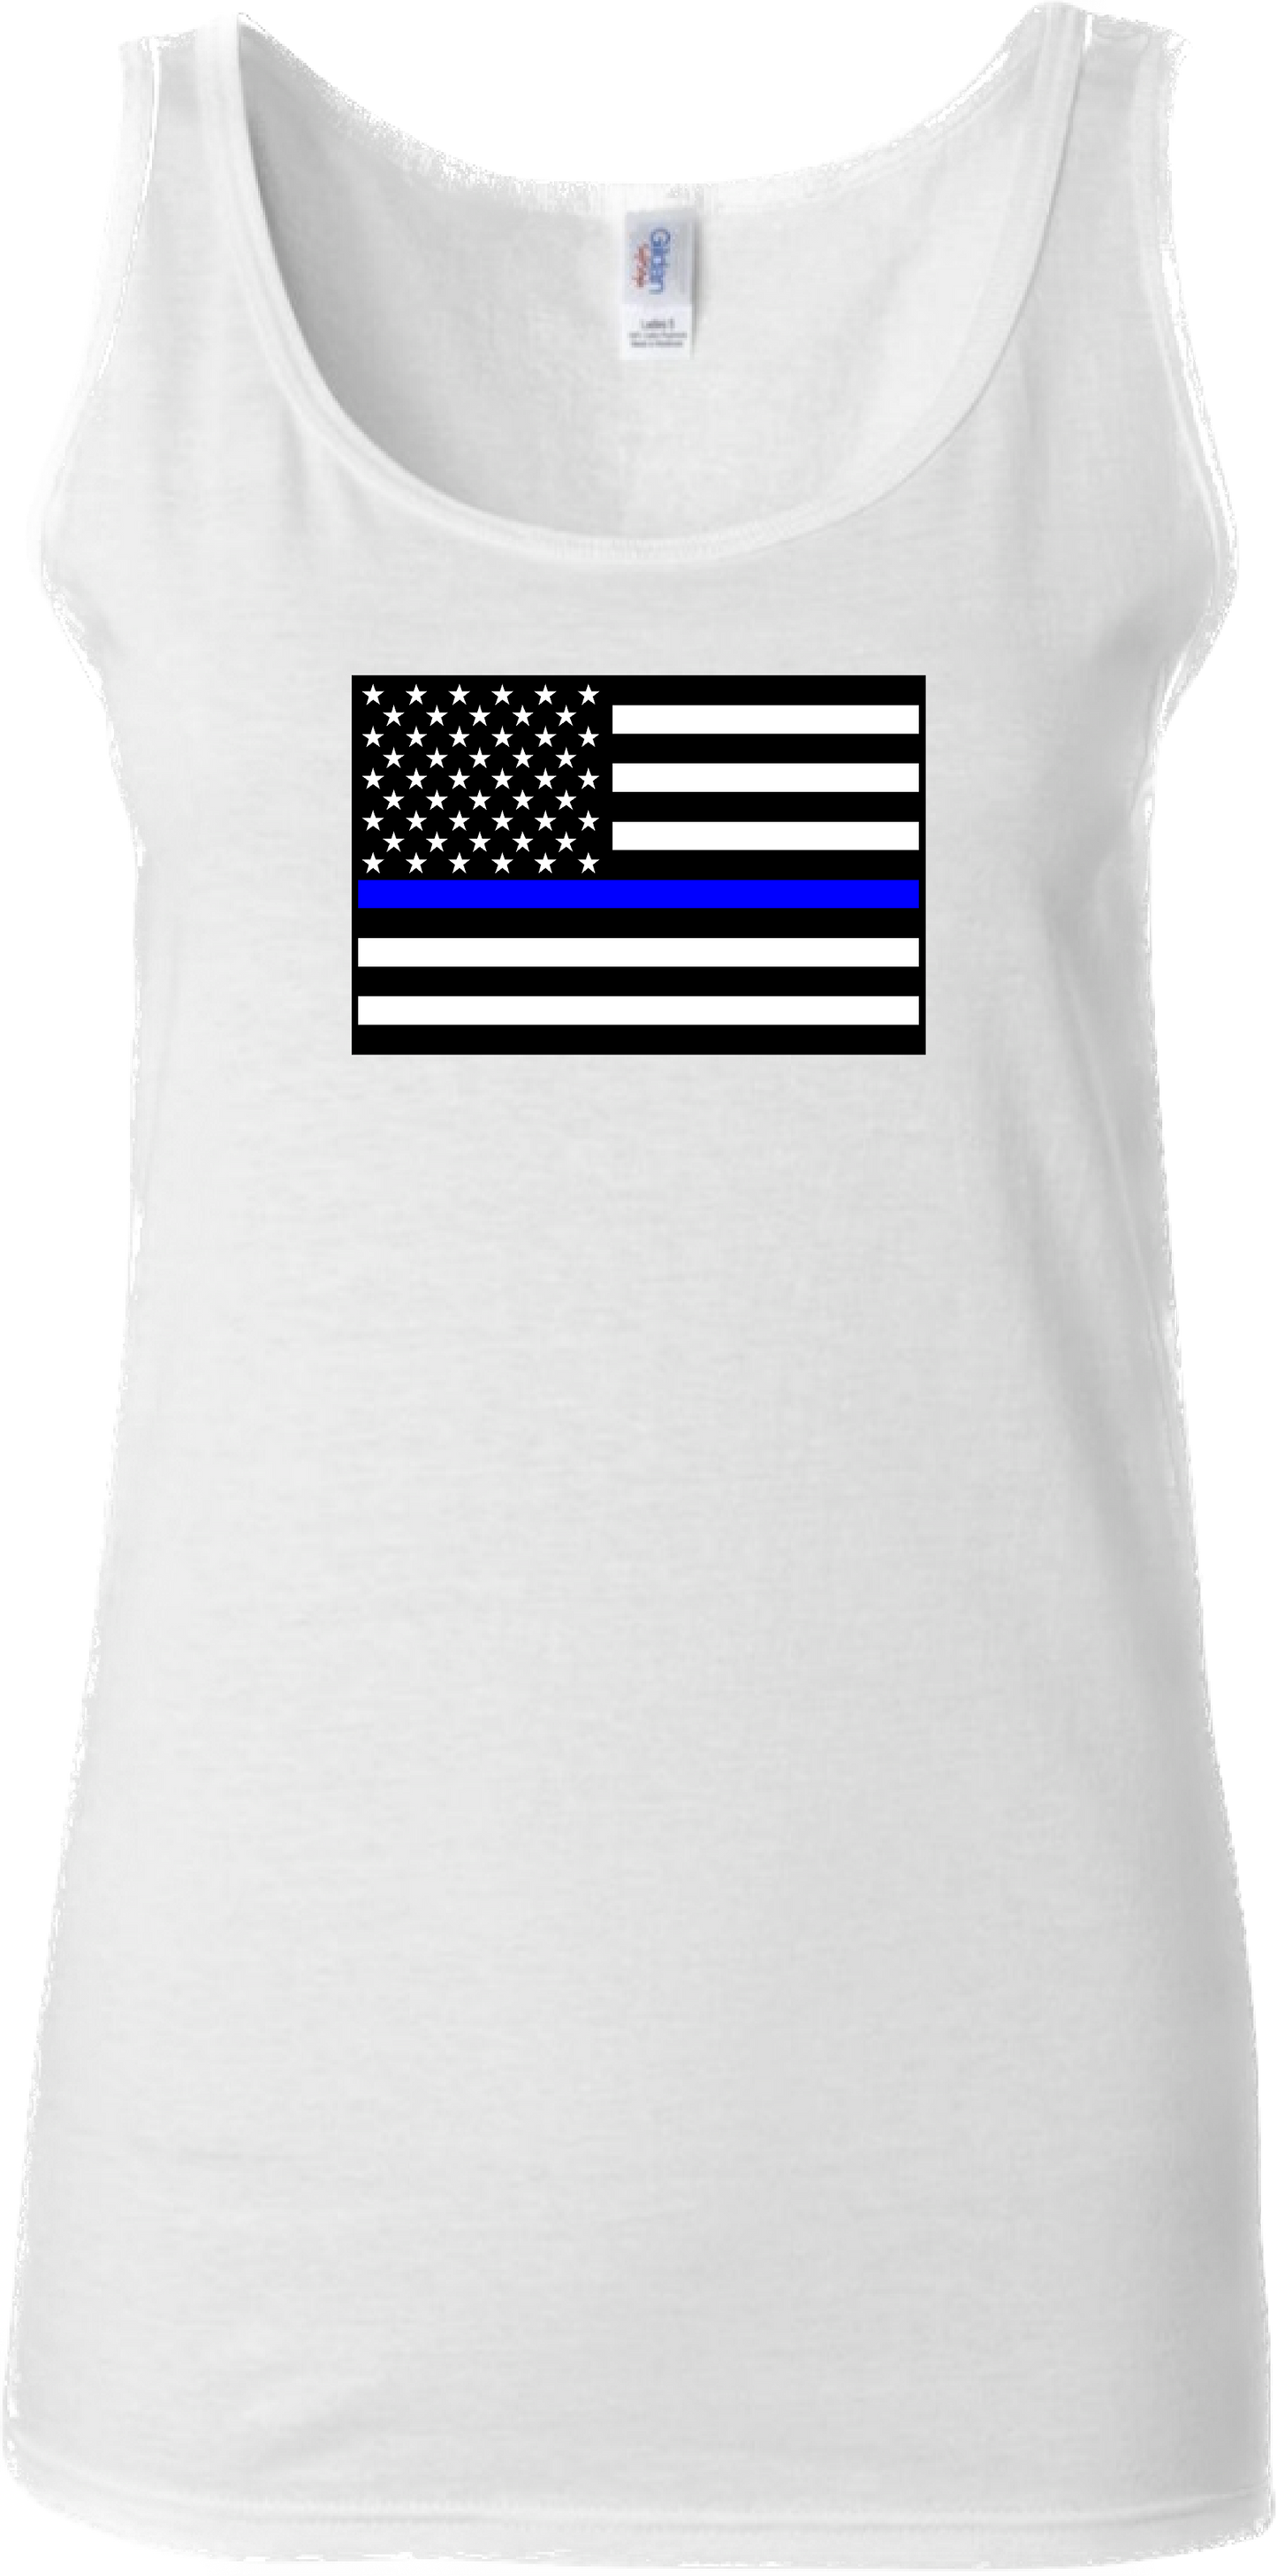 Women’s Thin Blue Line United States Flag Tank Top